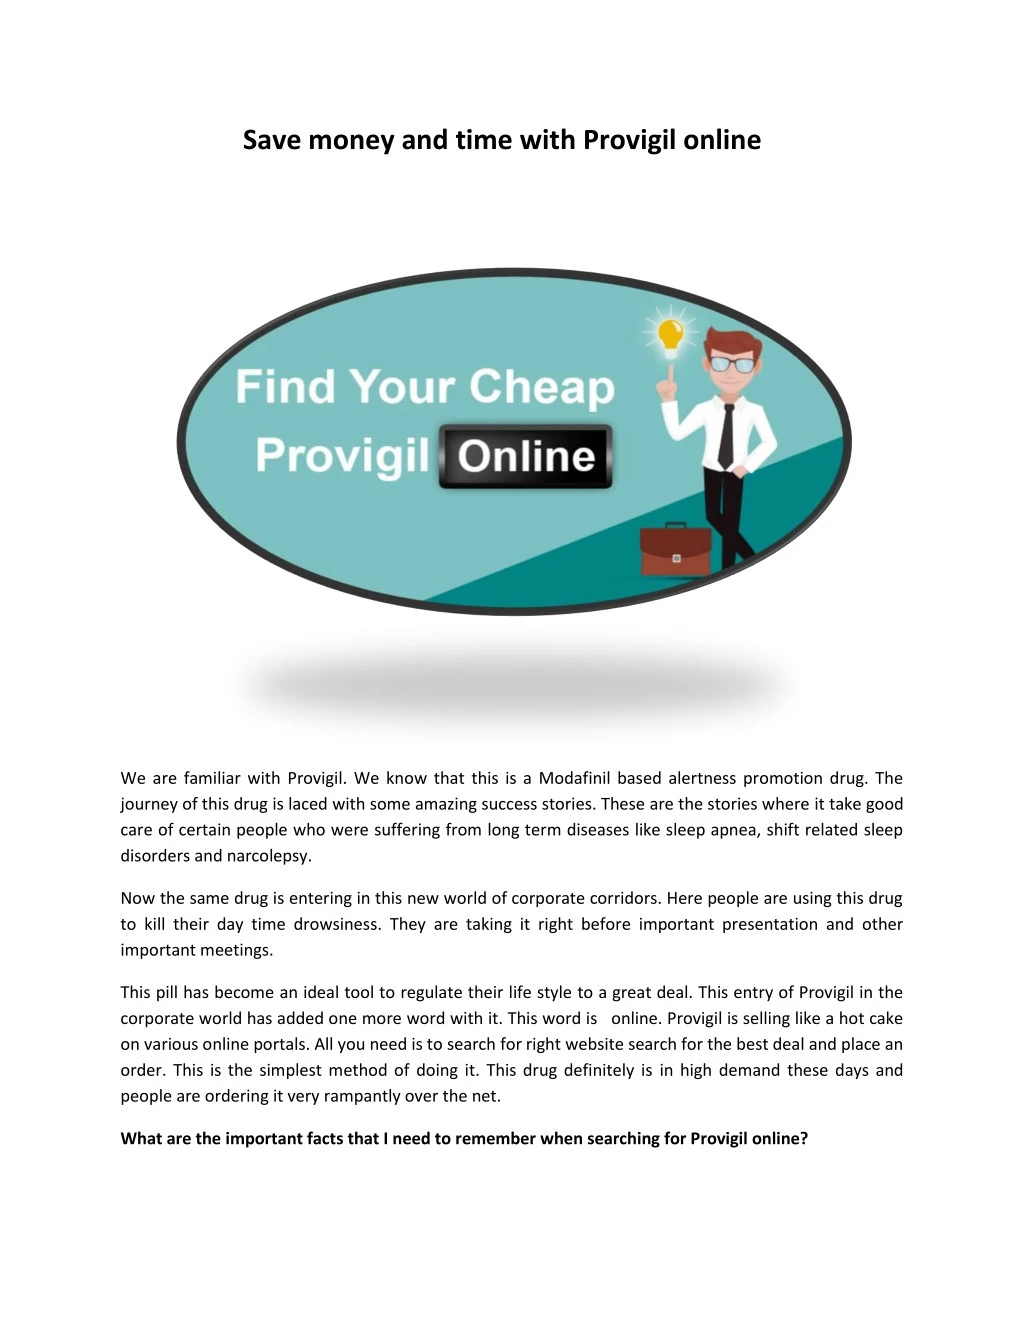 save money and time with provigil online